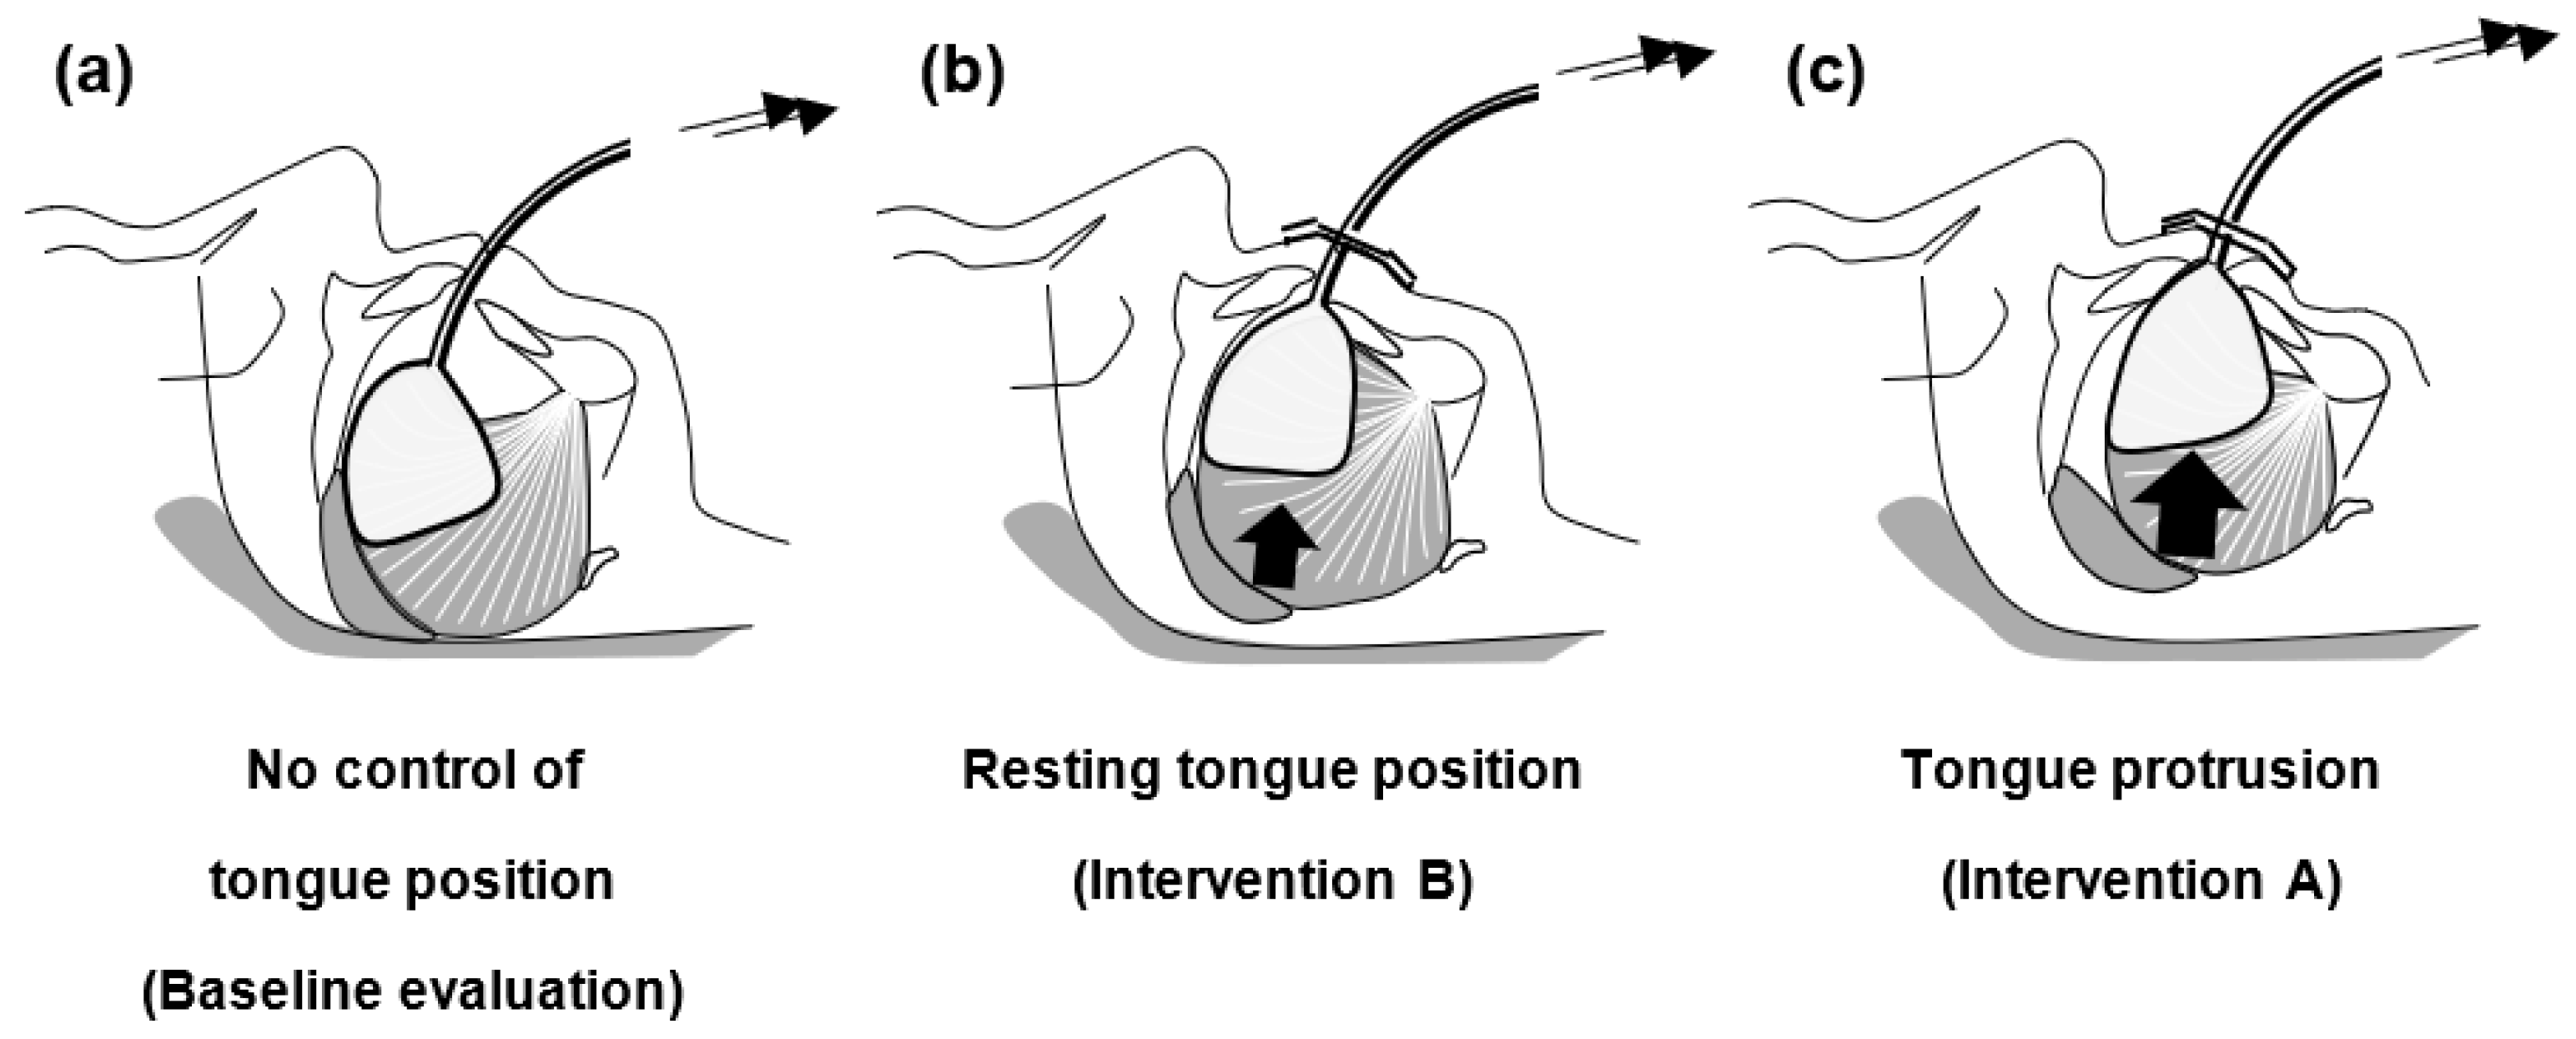 IJERPH | Free Full-Text | Control of Tongue Position in Patients with ...